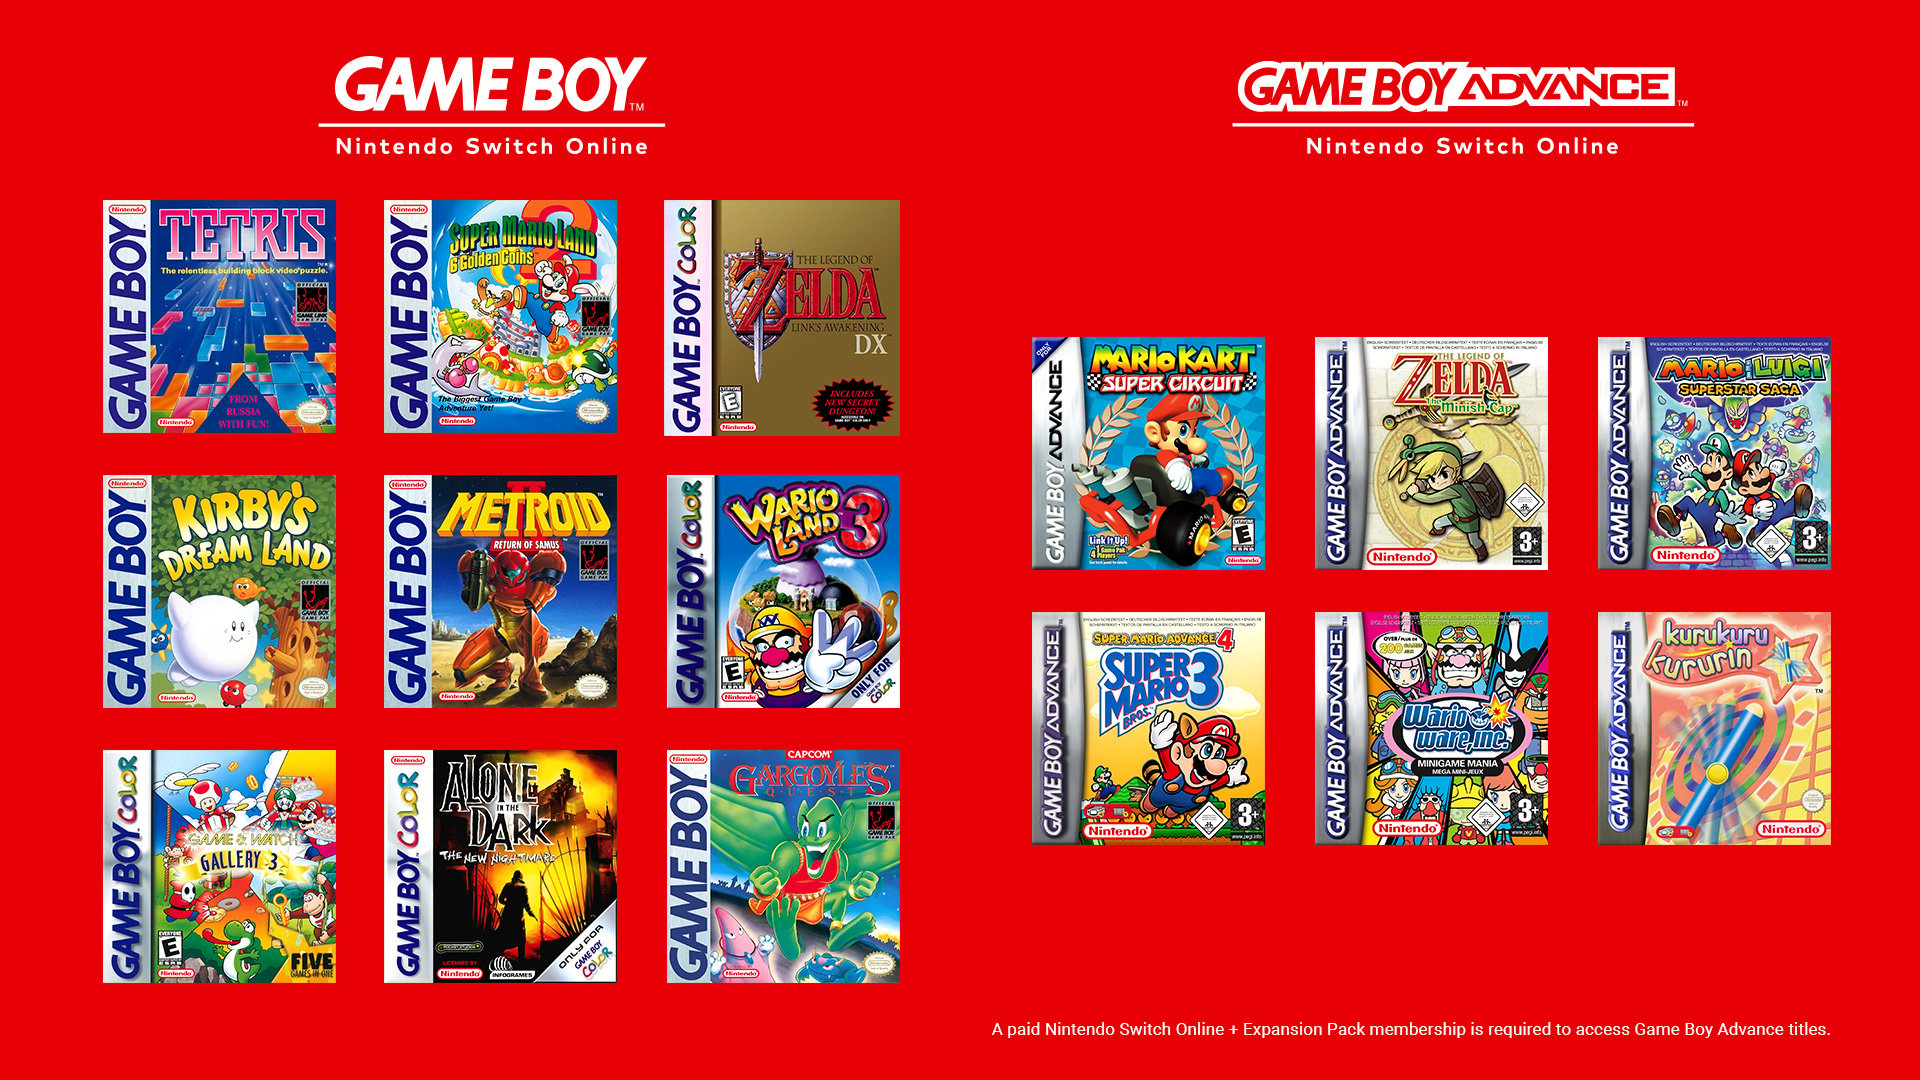 Gameboy & Gameboy Advance Games Now Available On Nintendo Switch